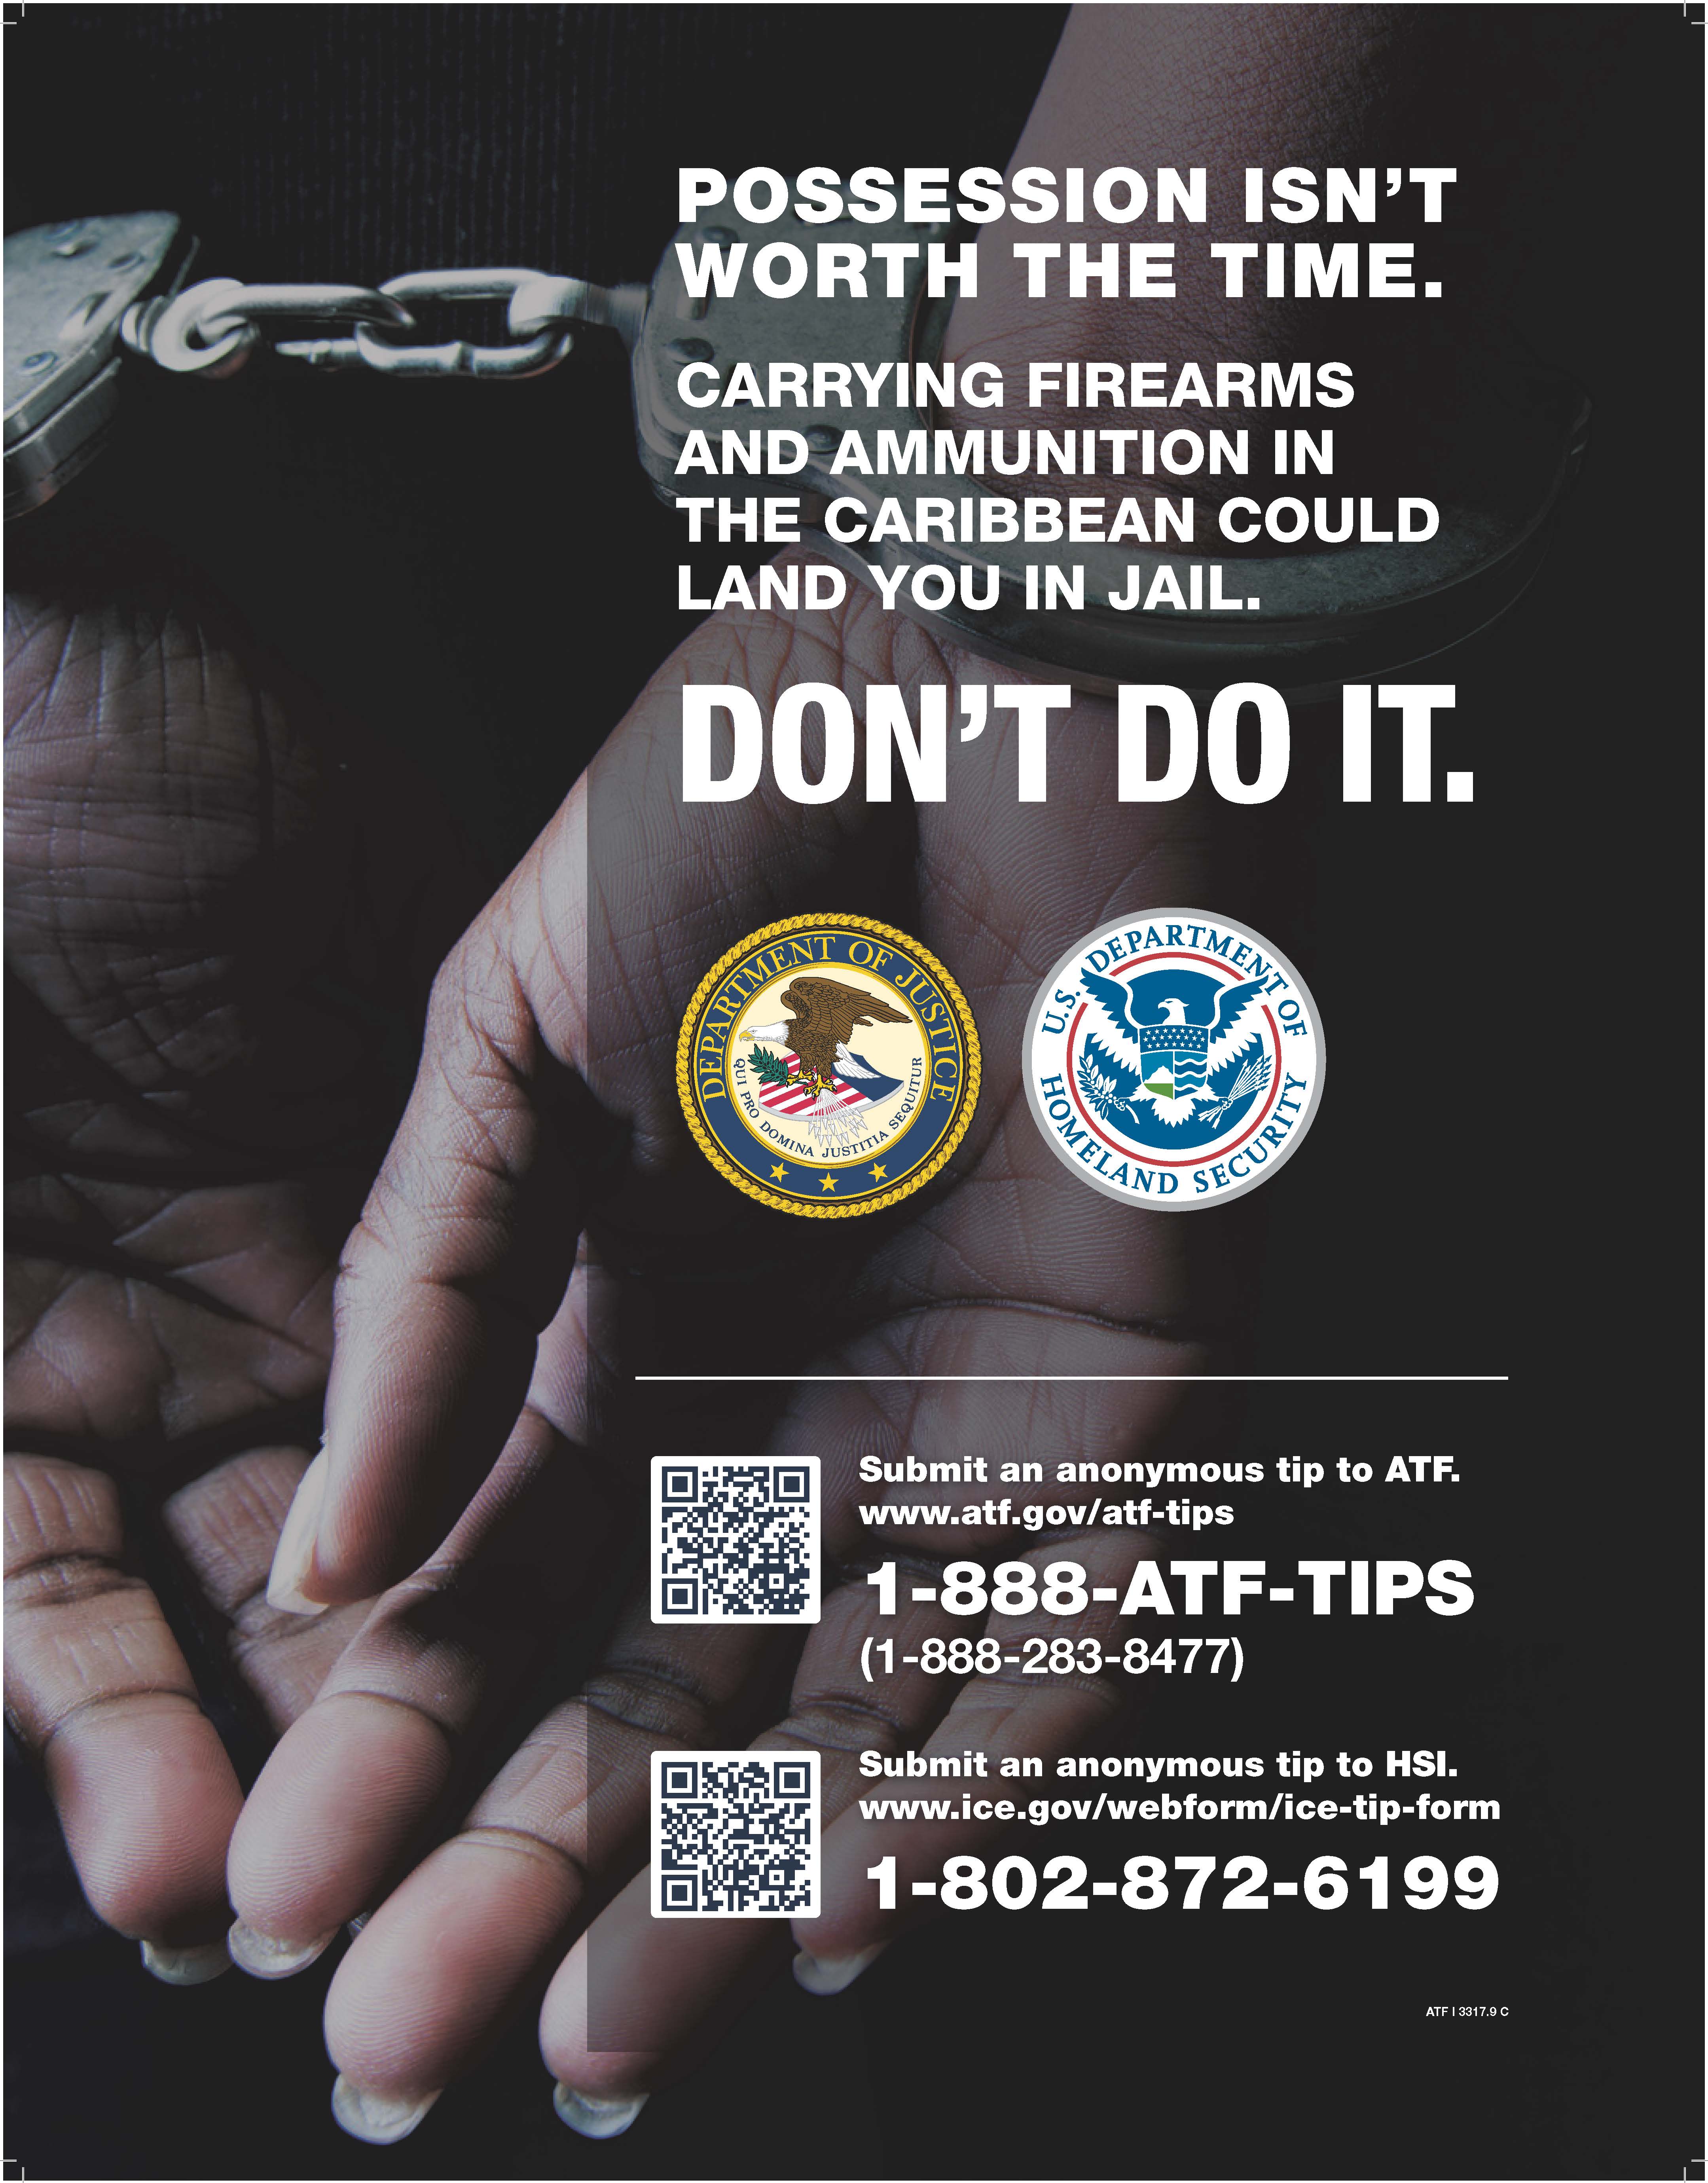 ATF I 3317.9 C CARICOM Anti-Firearms Trafficking Campaign Poster: hands in handcuffs